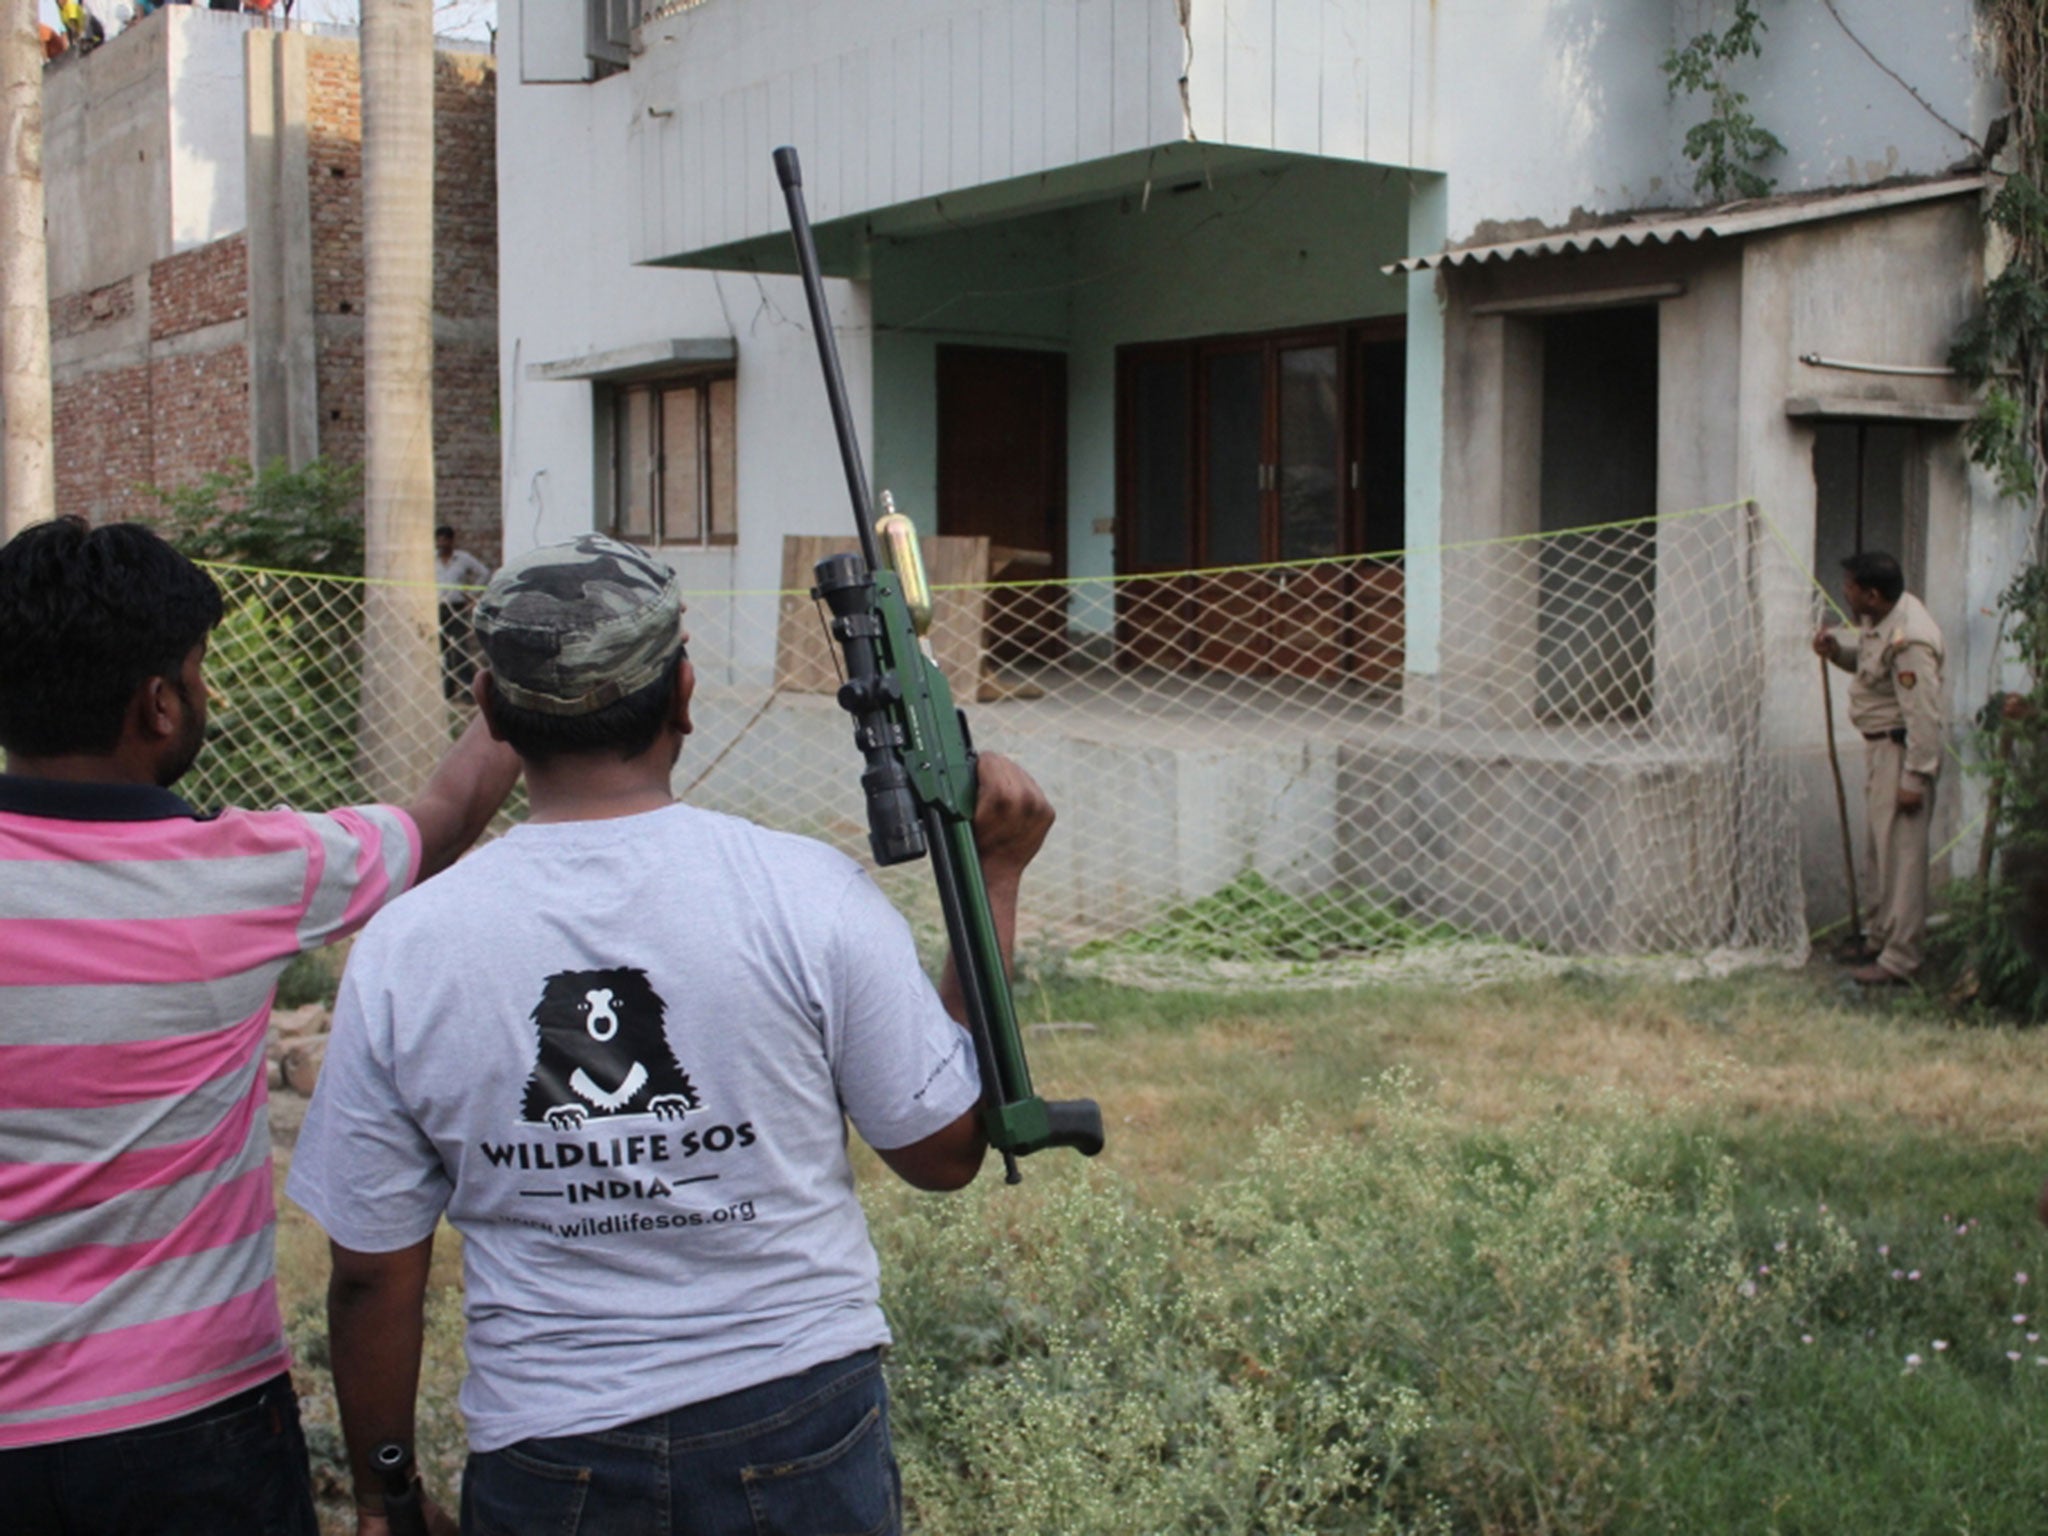 Rescuers gather with tranquilizer guns outside of the house ready to rescue the leopard